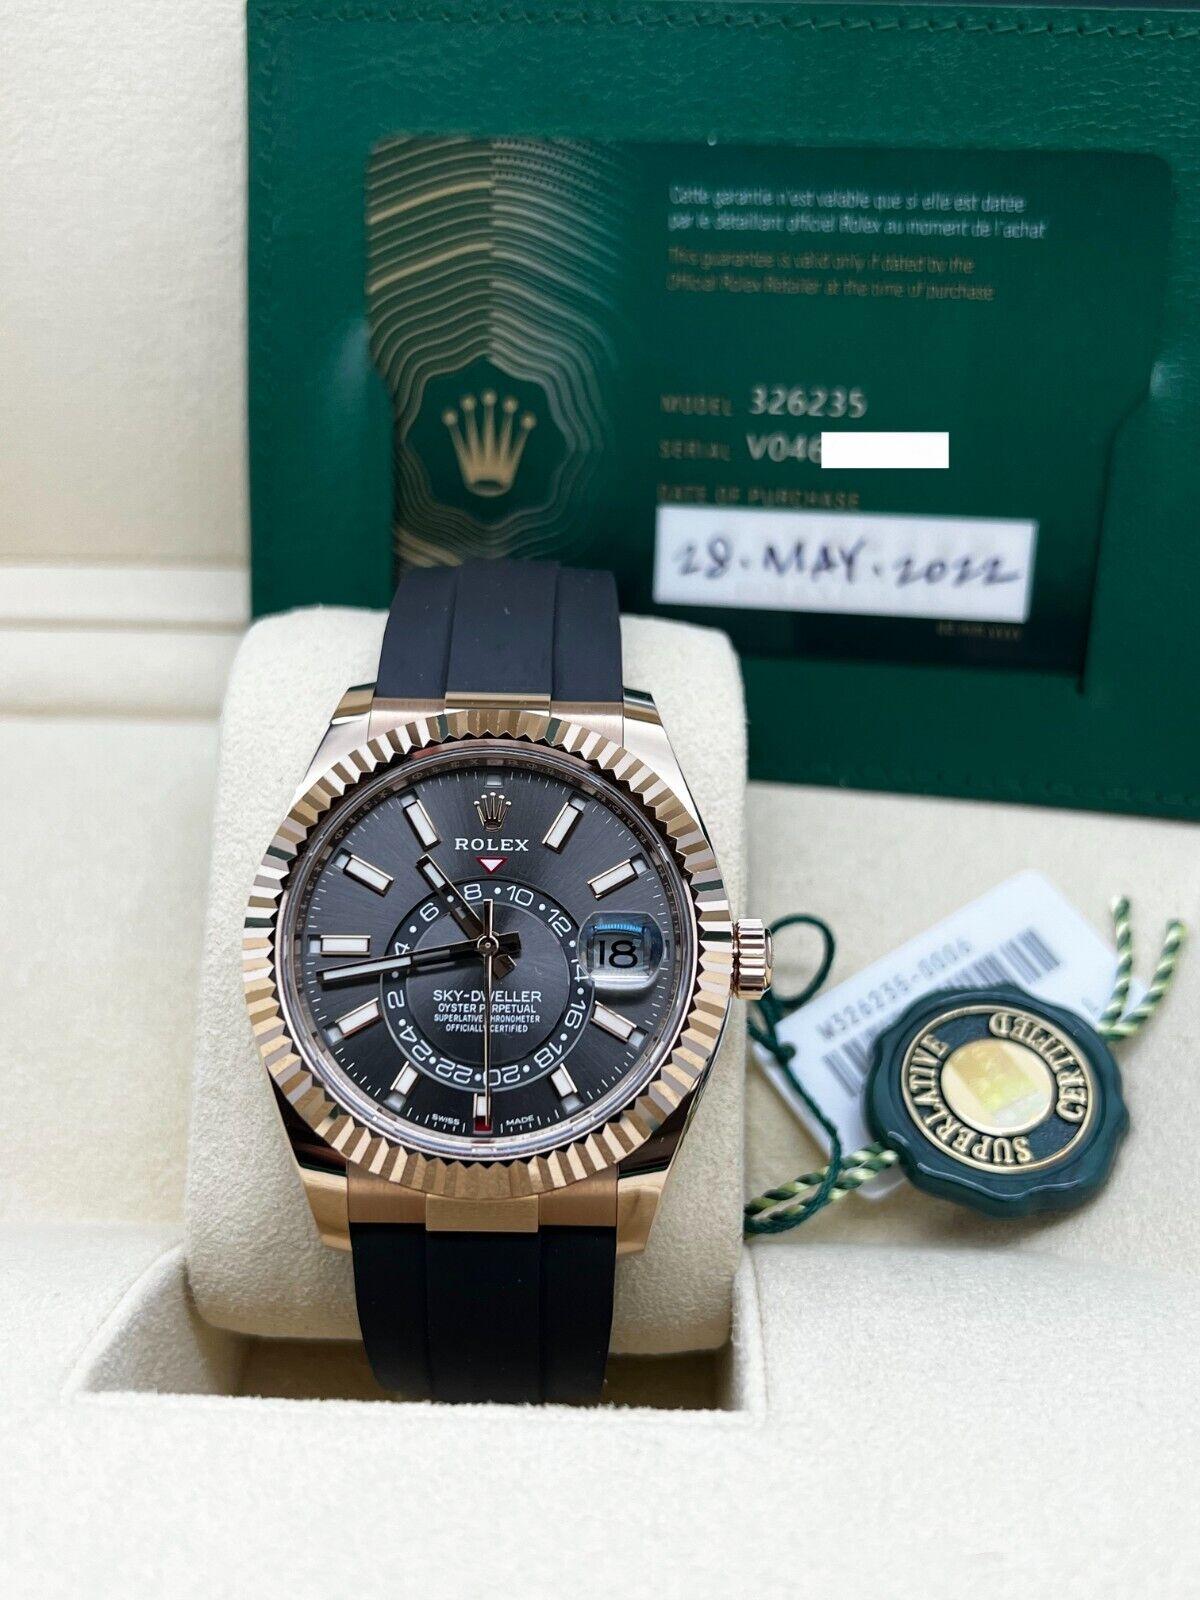 Style Number: 326235

Serial: V0464***

Year: 2022
 
Model: Sky Dweller
 
Case Material: 18K Rose Gold 
 
Band: Black Rubber Strap 
 
Bezel: 18K Rose Gold 
 
Dial: Rhodium 
 
Face: Sapphire Crystal 
 
Case Size: 42mm
 
Includes: 
-Rolex Box &